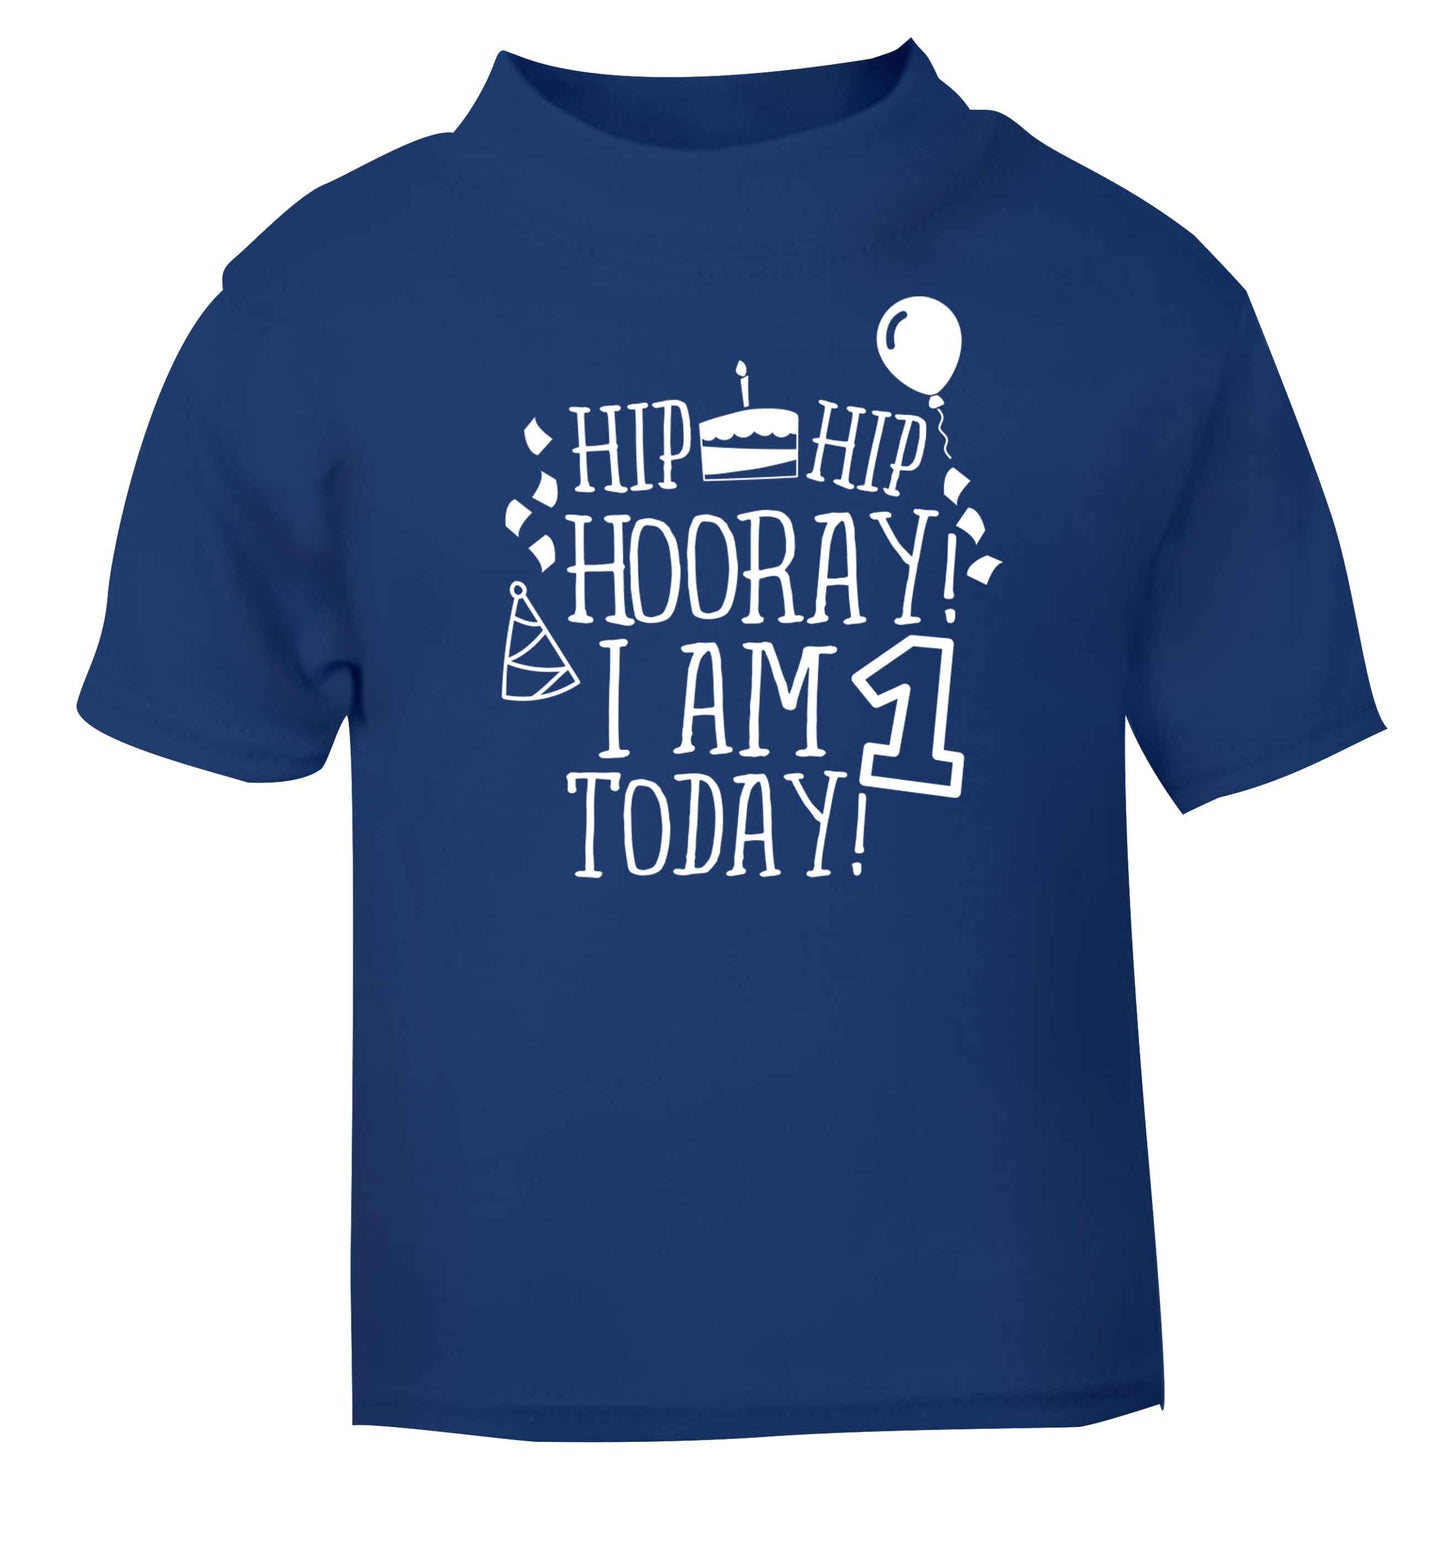 I am One Today blue baby toddler Tshirt 2 Years